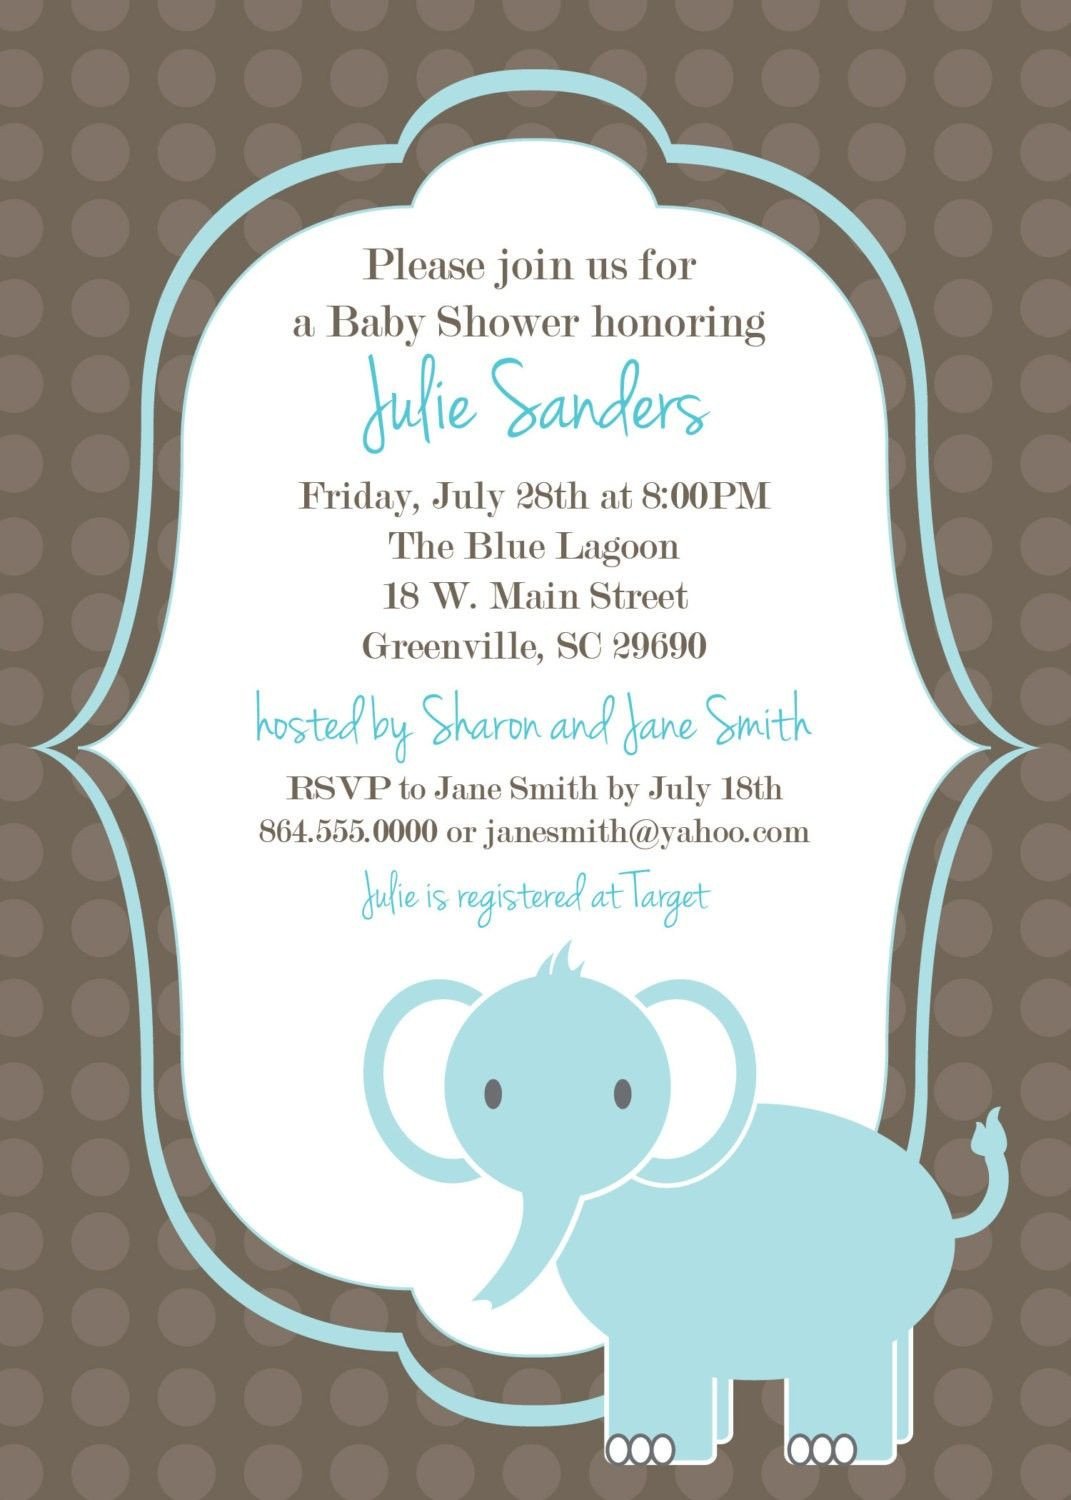 Baby Shower Invite Template Word Download Free Template Got the Free Baby Shower